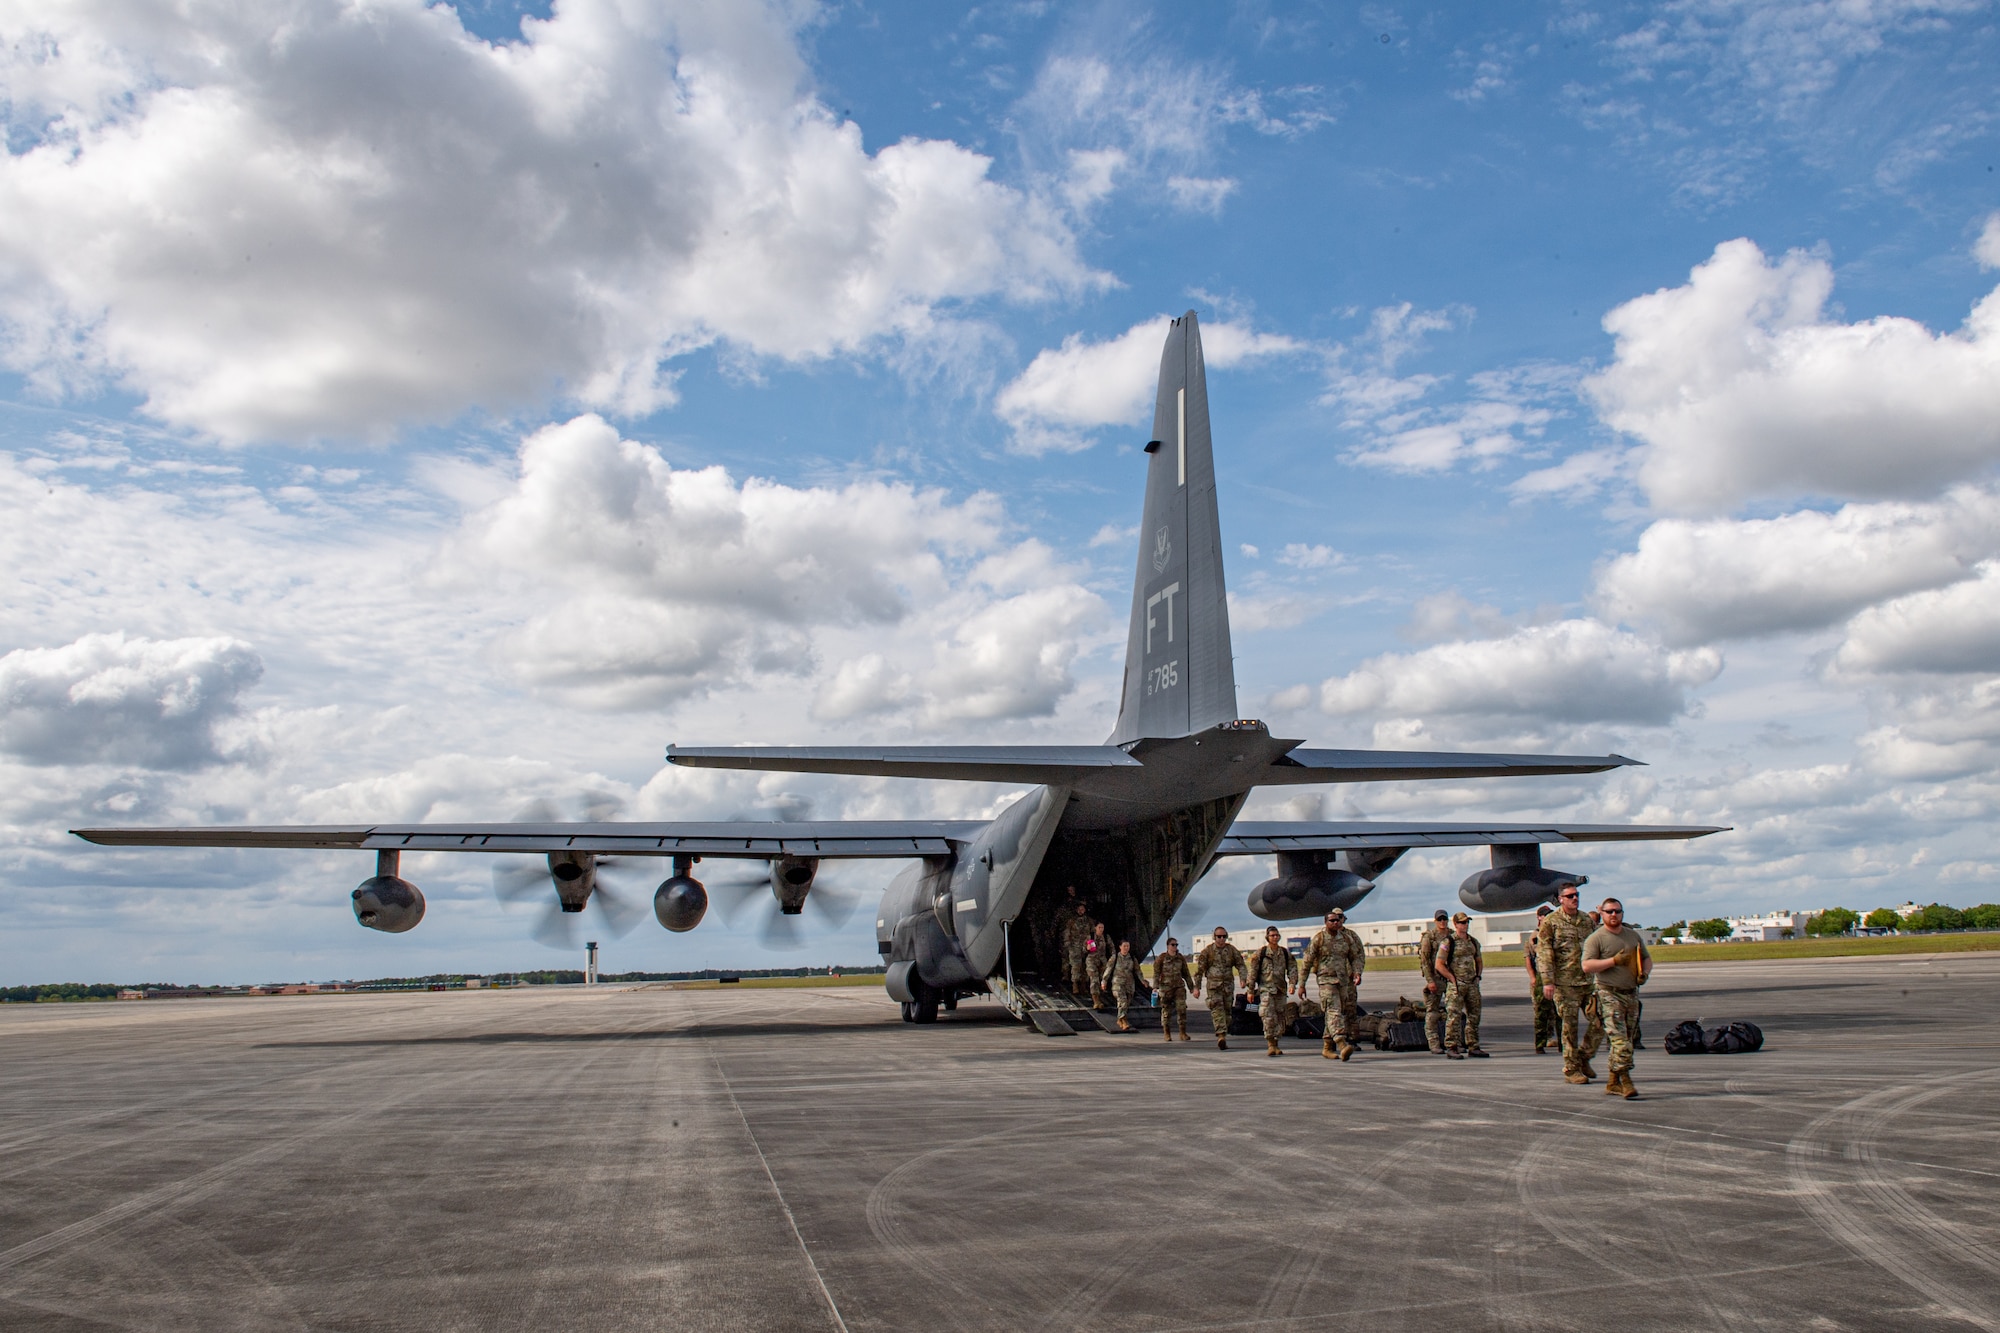 U.S. Air Force Tech. Sgt. Benjamin Griggs, 347th Operations Support Squadron air transportation supervisor, leads Airmen off an HC-130J Combat King II during Exercise Ready Tiger 24-1 at Savannah Air National Guard Base, Georgia, April 9, 2024. Ready Tiger 24-1 is a readiness exercise demonstrating the 23rd Wing’s ability to plan, prepare and execute operations and maintenance to project air power in contested and dispersed locations, defending the United States’ interests and allies. (U.S. Air Force photo by Senior Airman Courtney Sebastianelli)